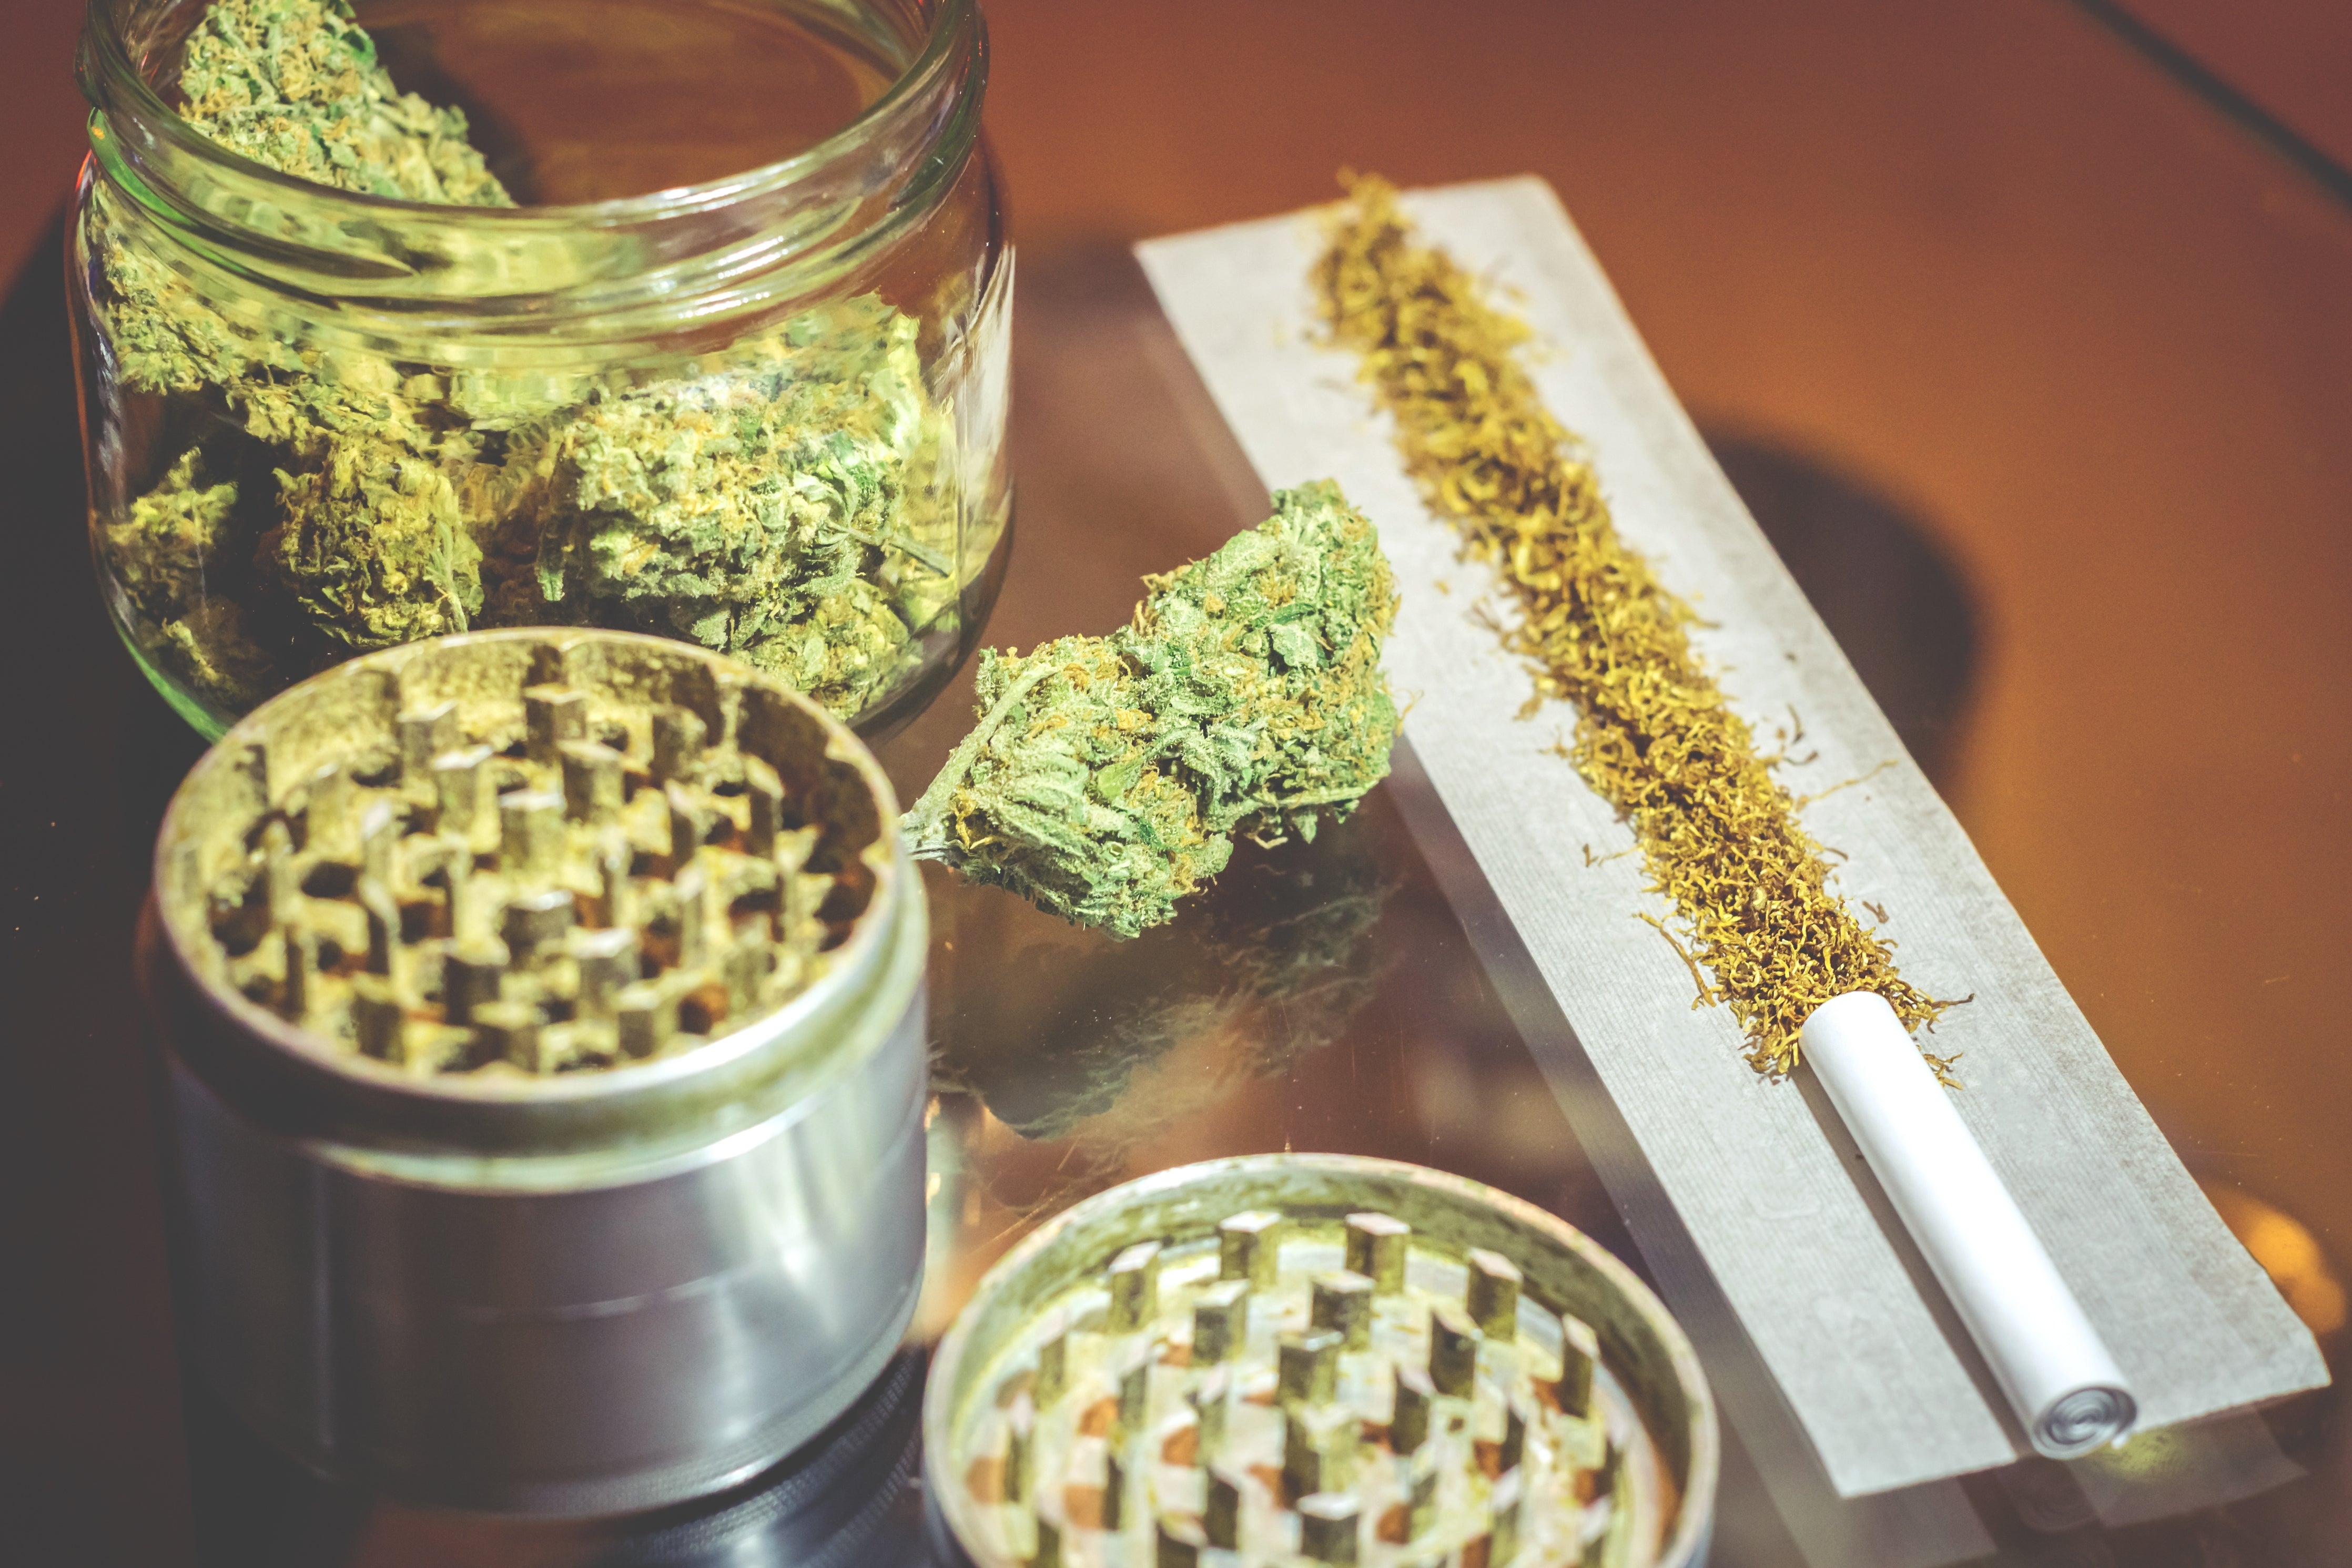 A glass jar of cannabis flower sits next to grinders and ground weed being rolled up in a joint, not a pre-roll.